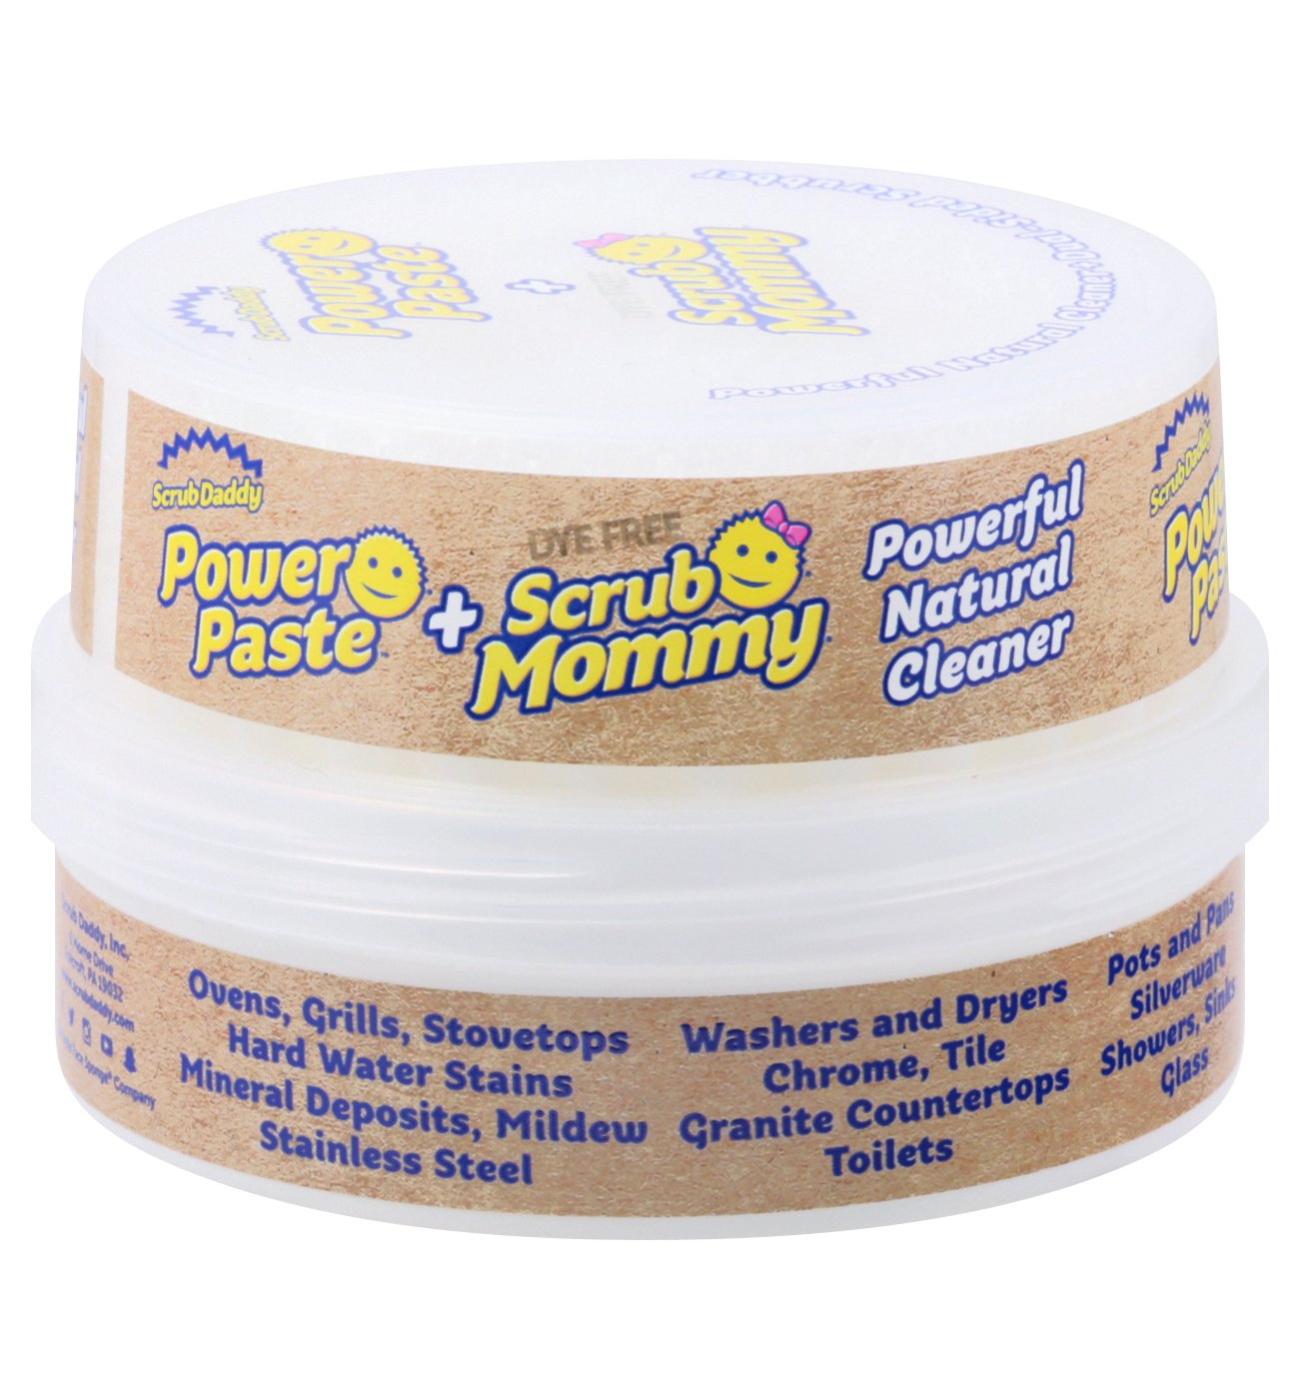 Power paste is an absolute must have in your cleaning kit